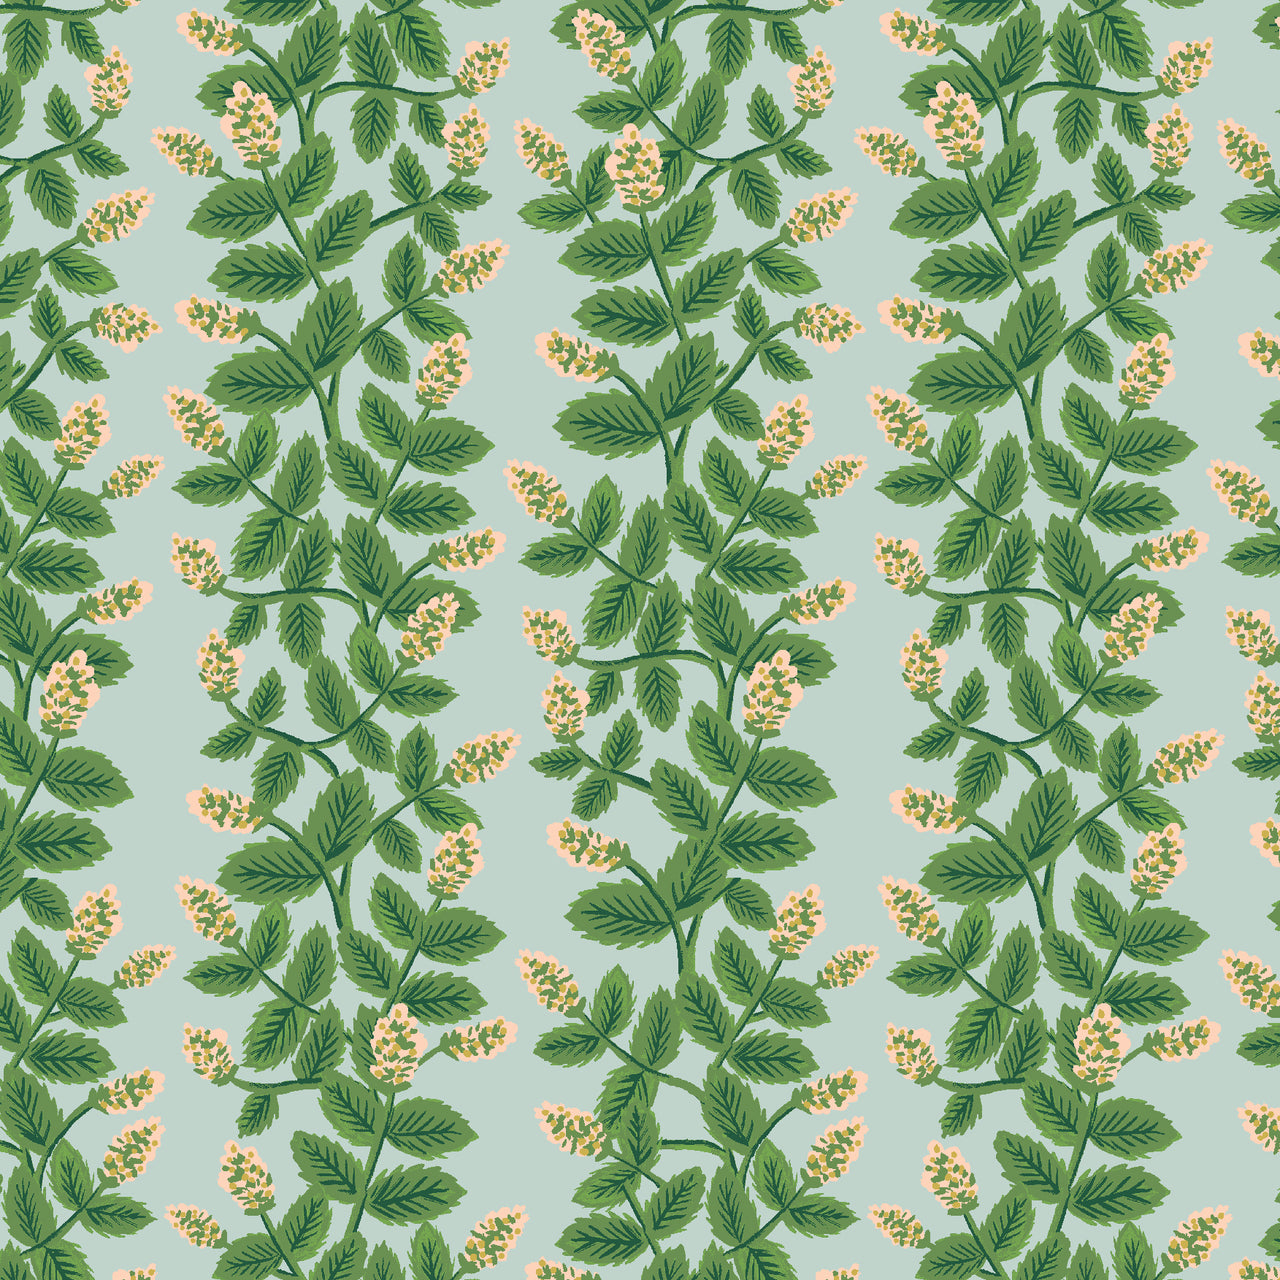 Primavera by Rifle Paper Co : Climbing Vines in Mint : Cotton and Steel